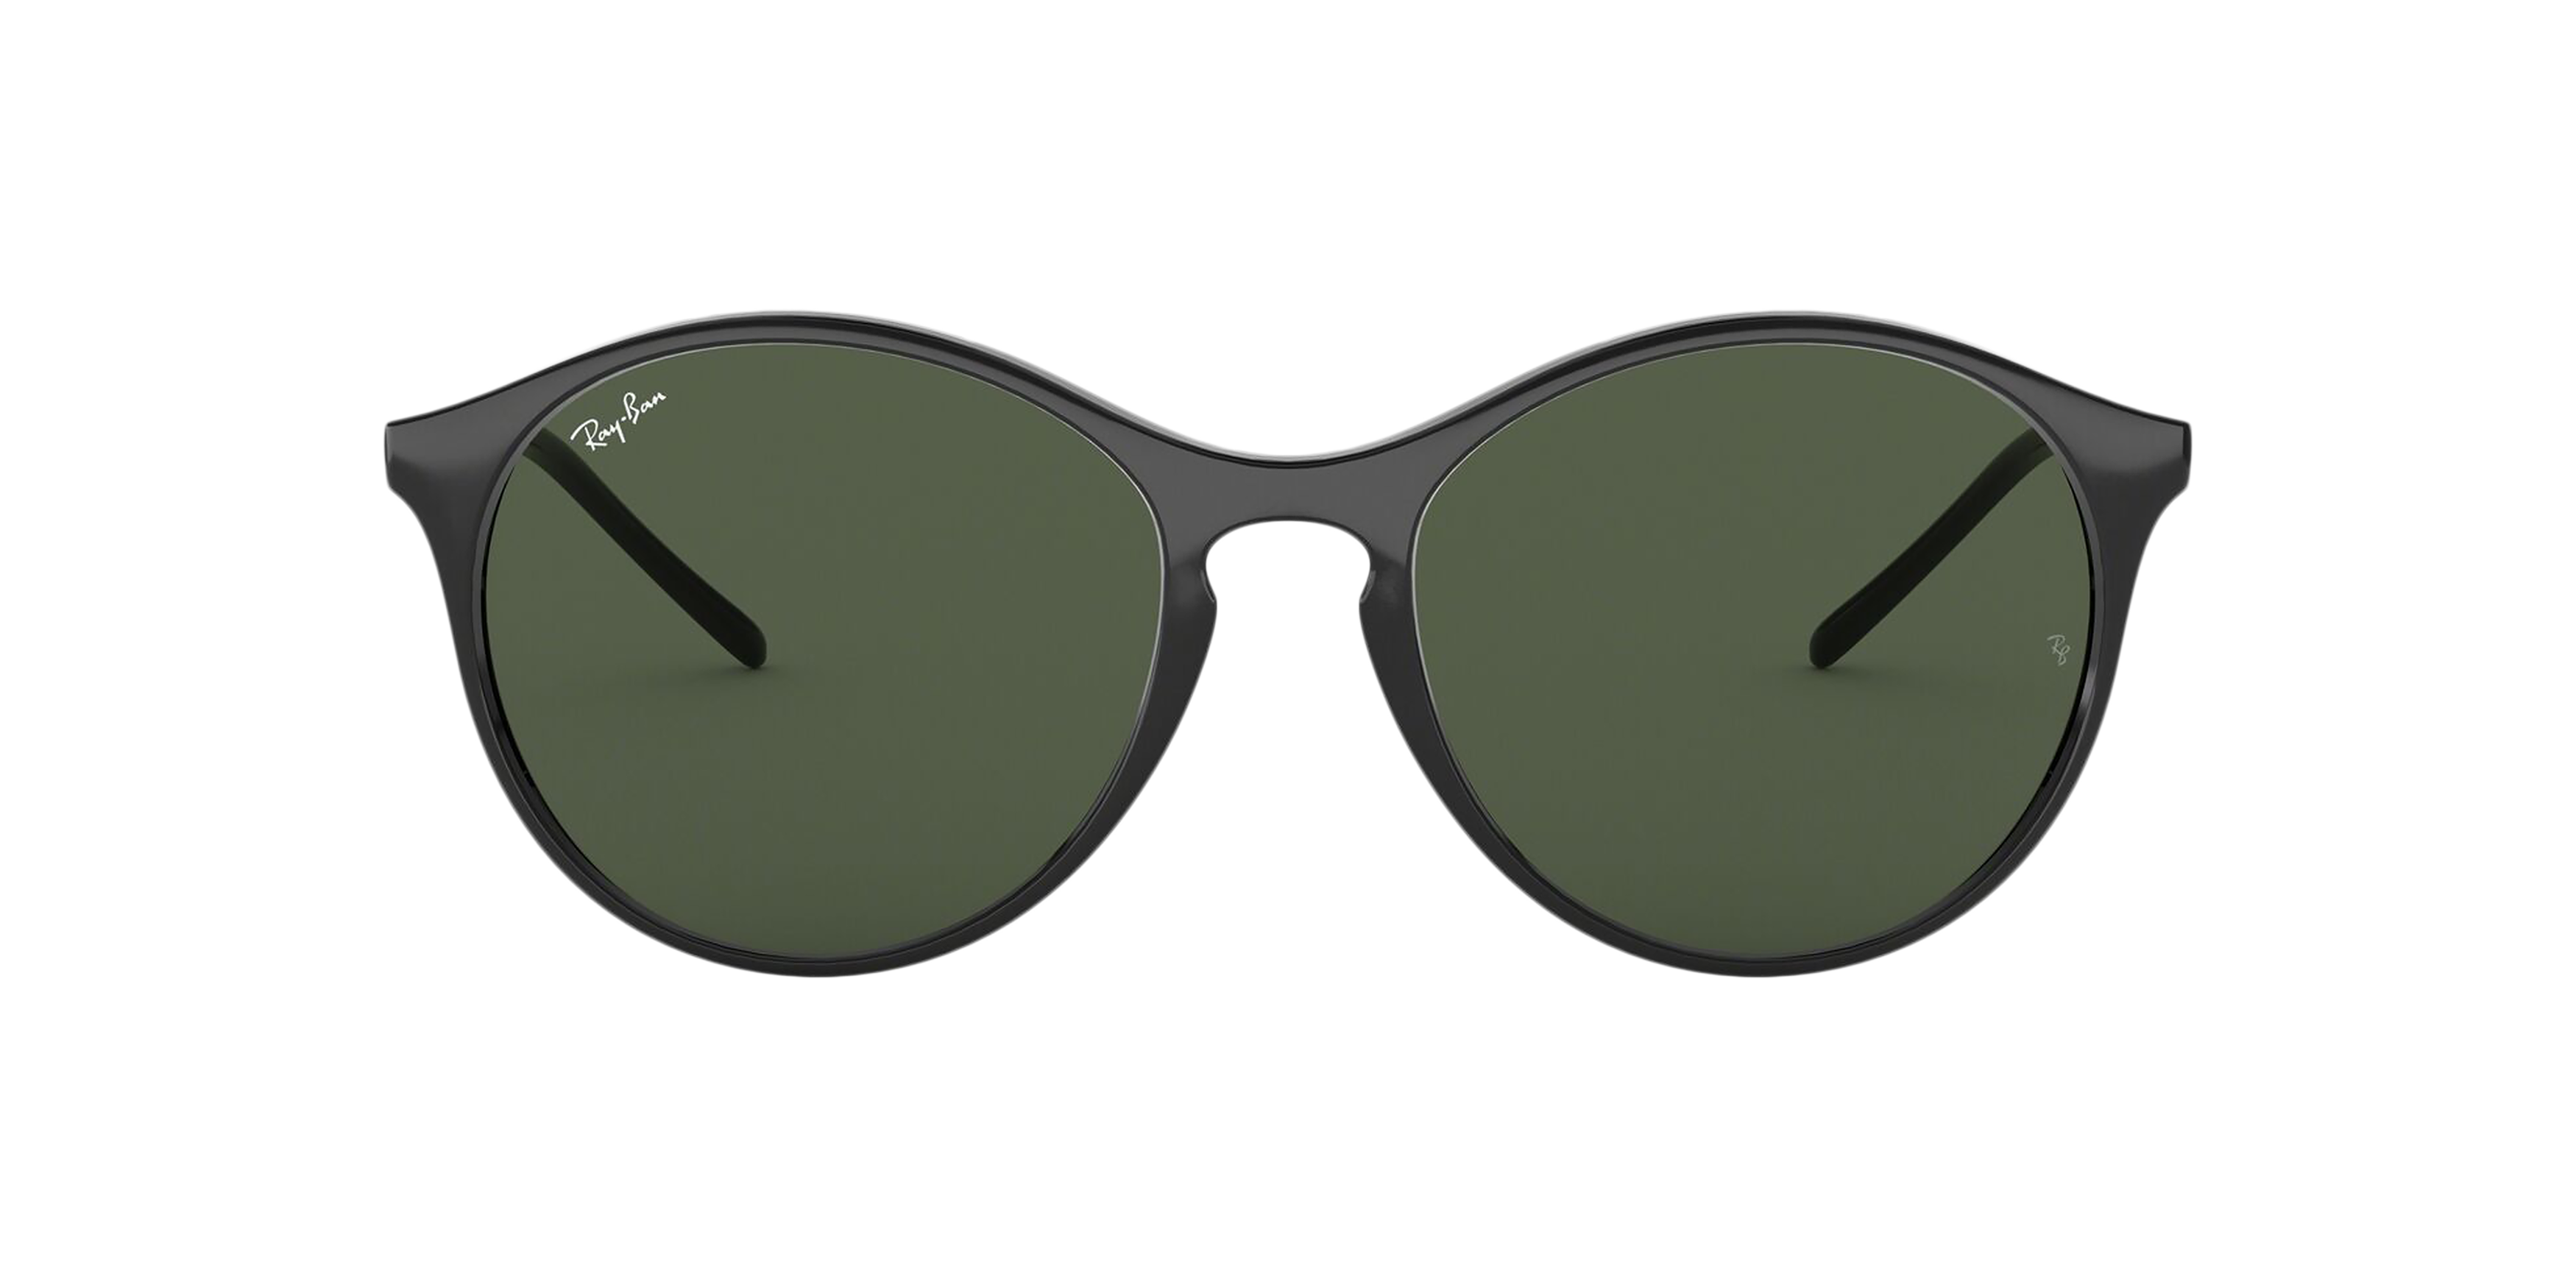 [products.image.front] Ray-Ban RB4371 601/71